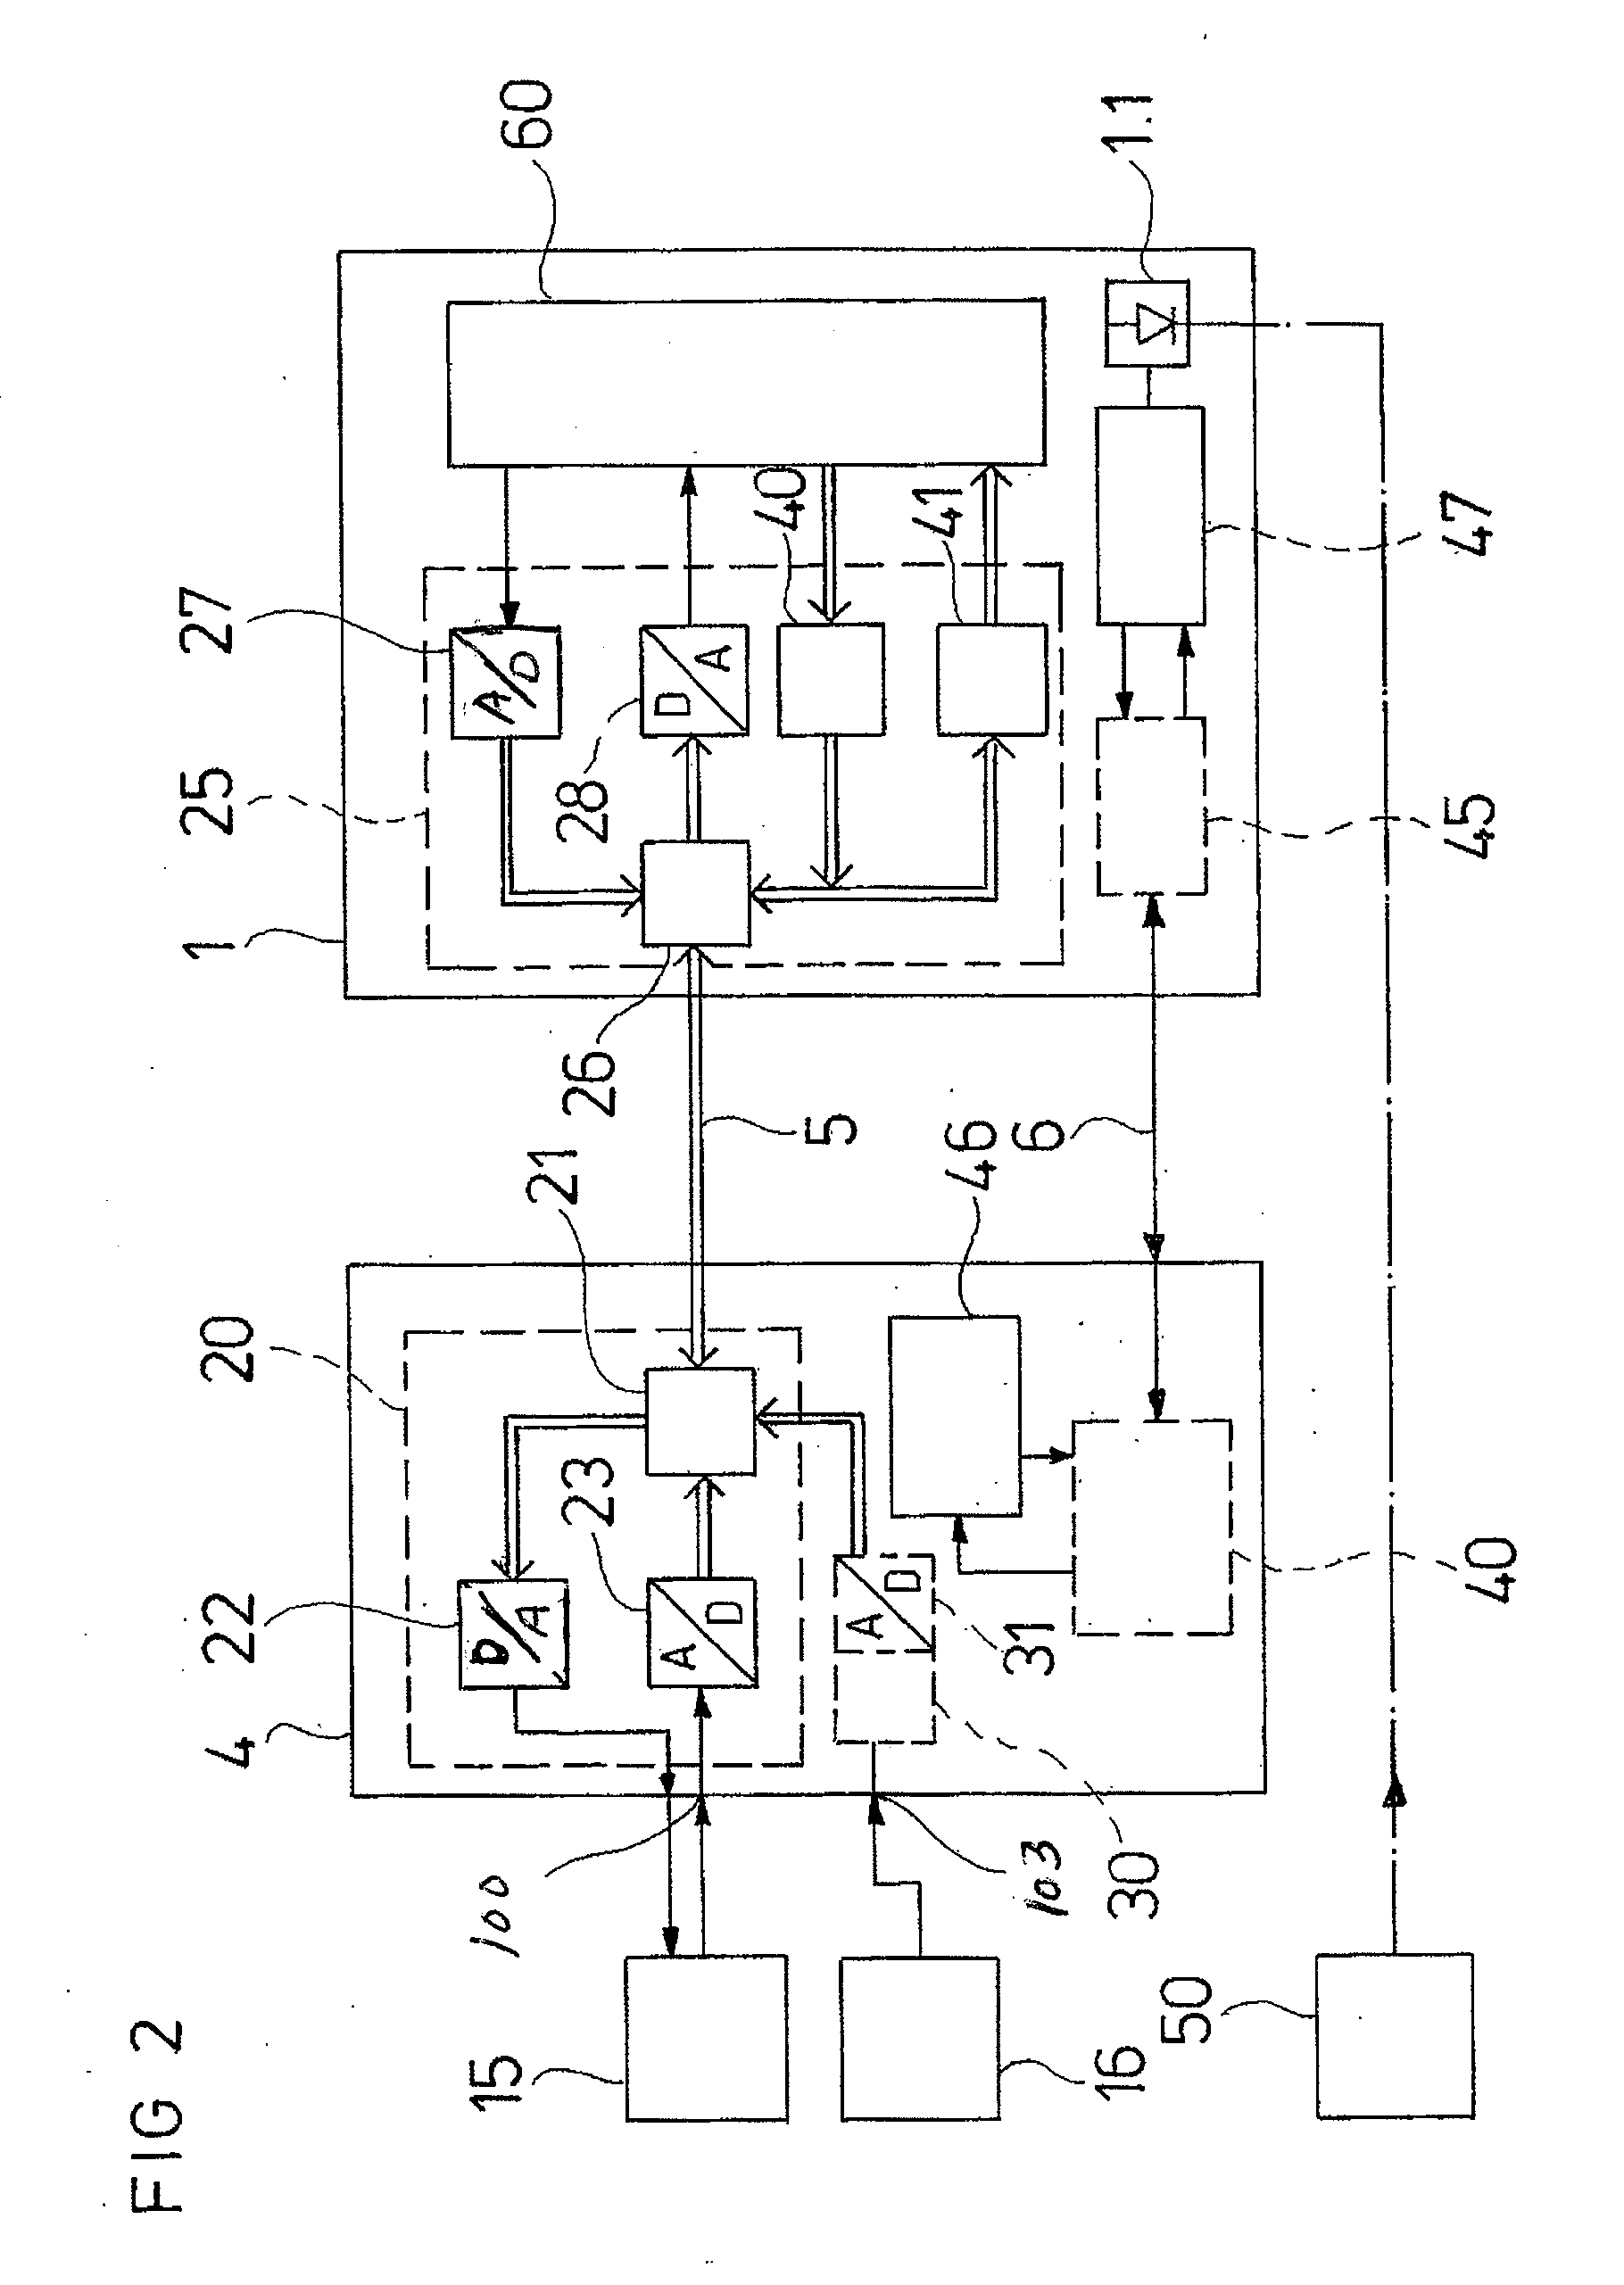 Television receiver with a flat screen display